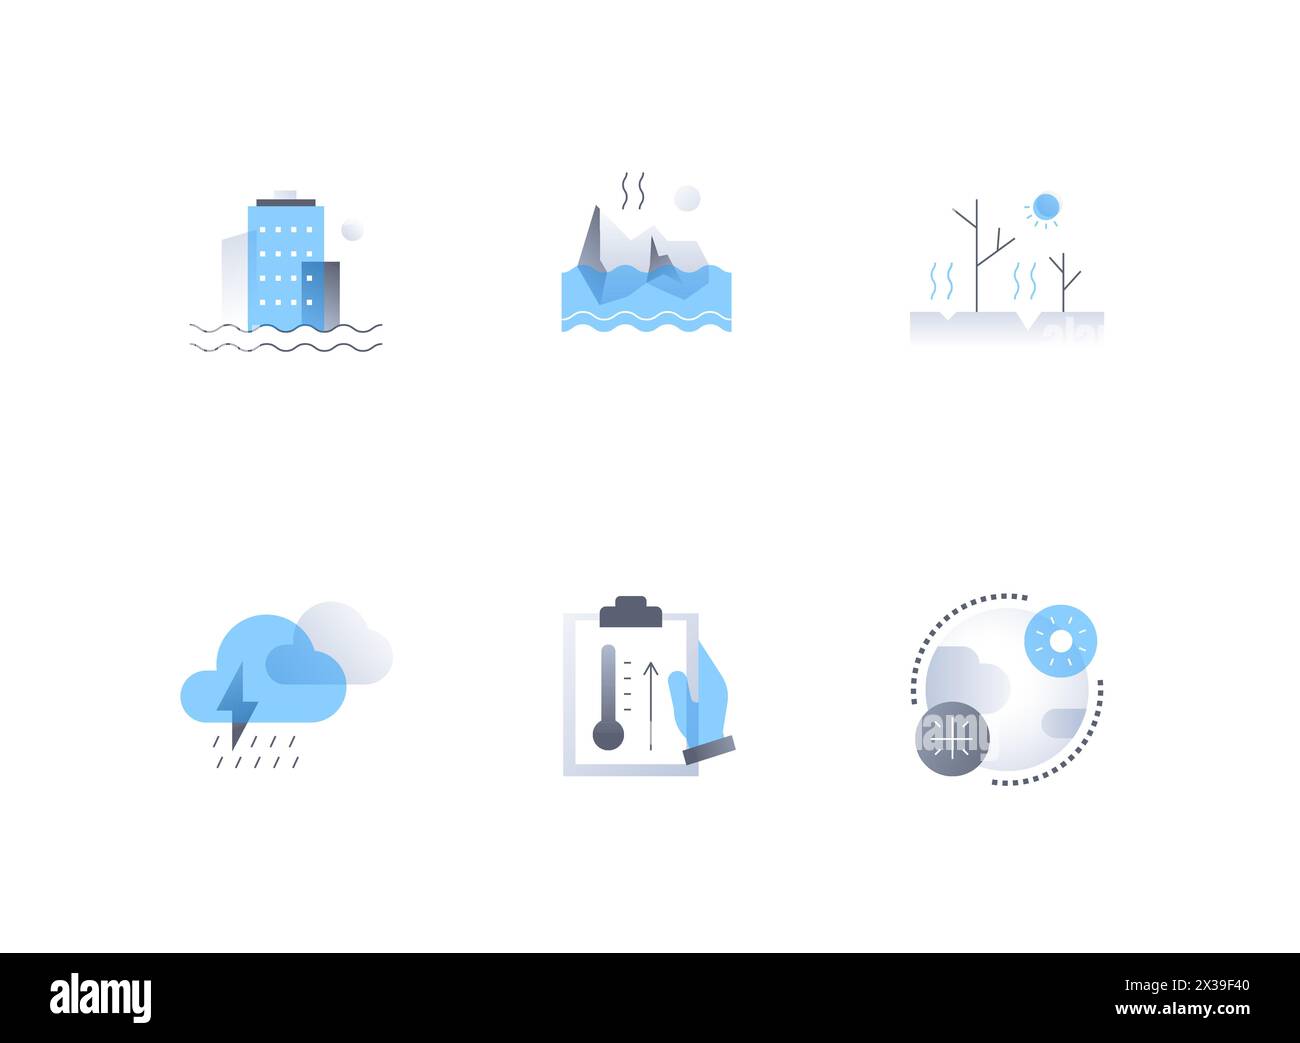 Ecological disasters - flat design style icons set. High quality colorful images of flooding in the city, melting glaciers, desertification, drought, Stock Vector